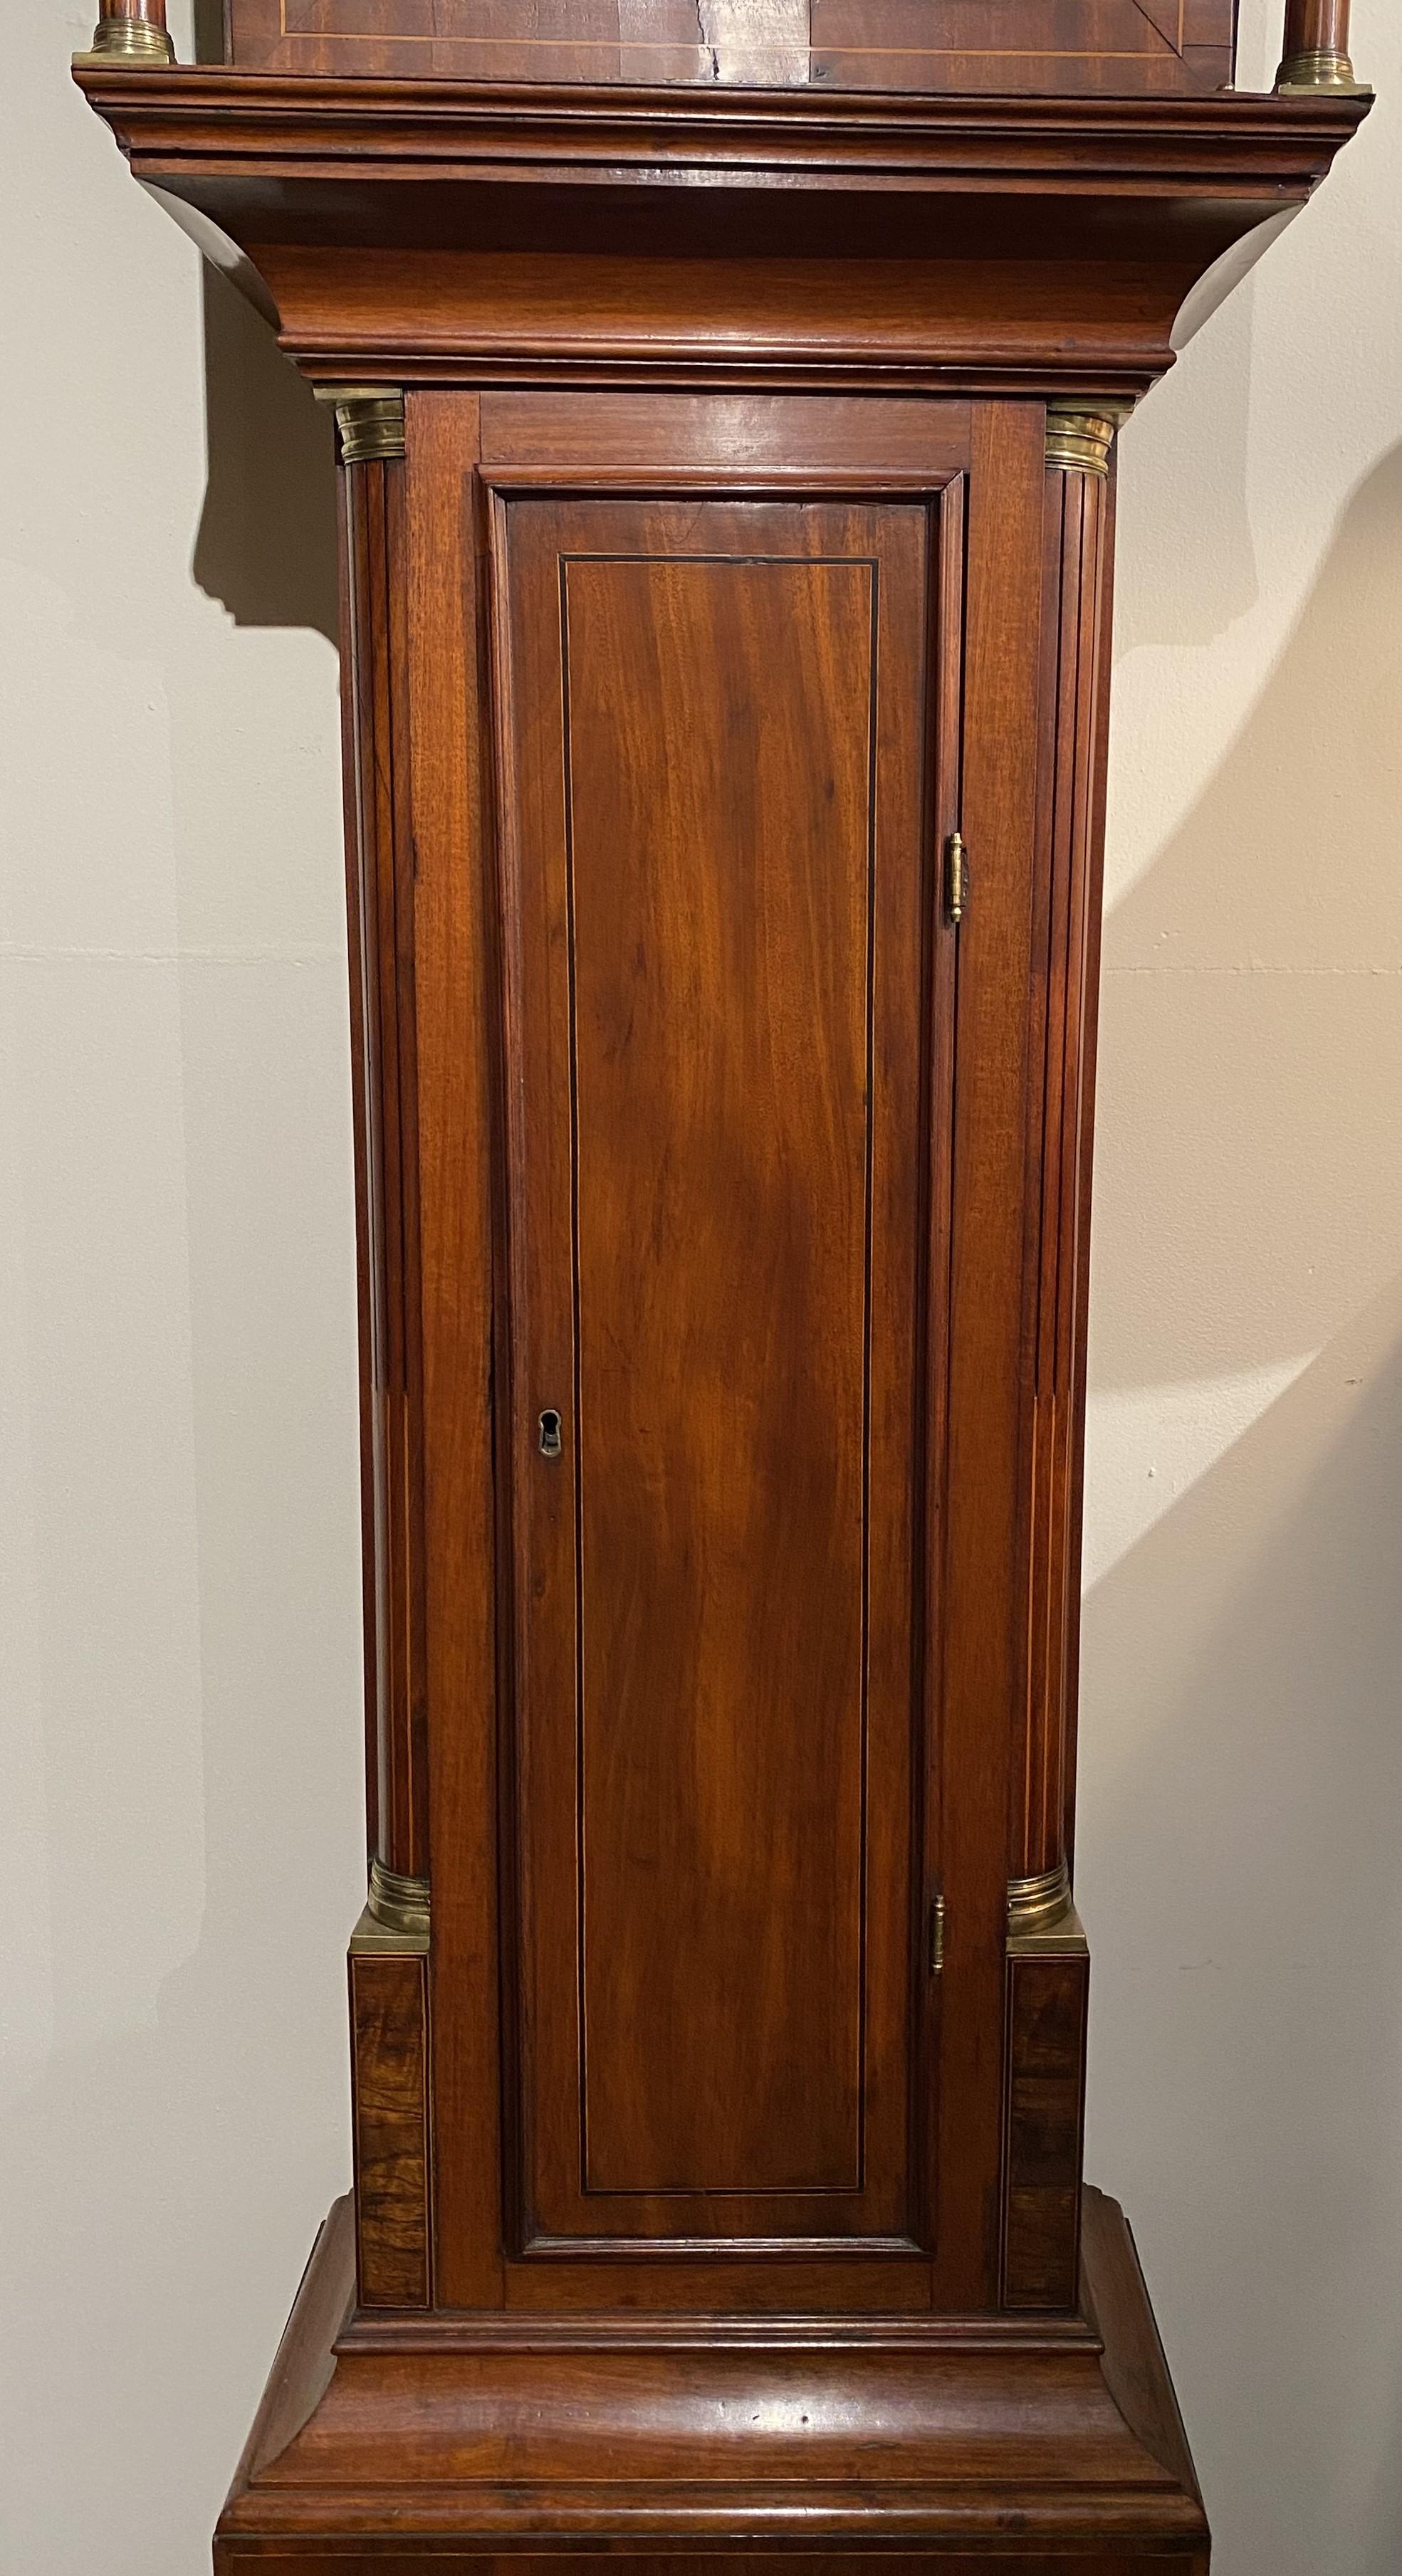 American William Cummens Federal Mahogany Tall Clock with Moon Phase Dial circa 1820 For Sale